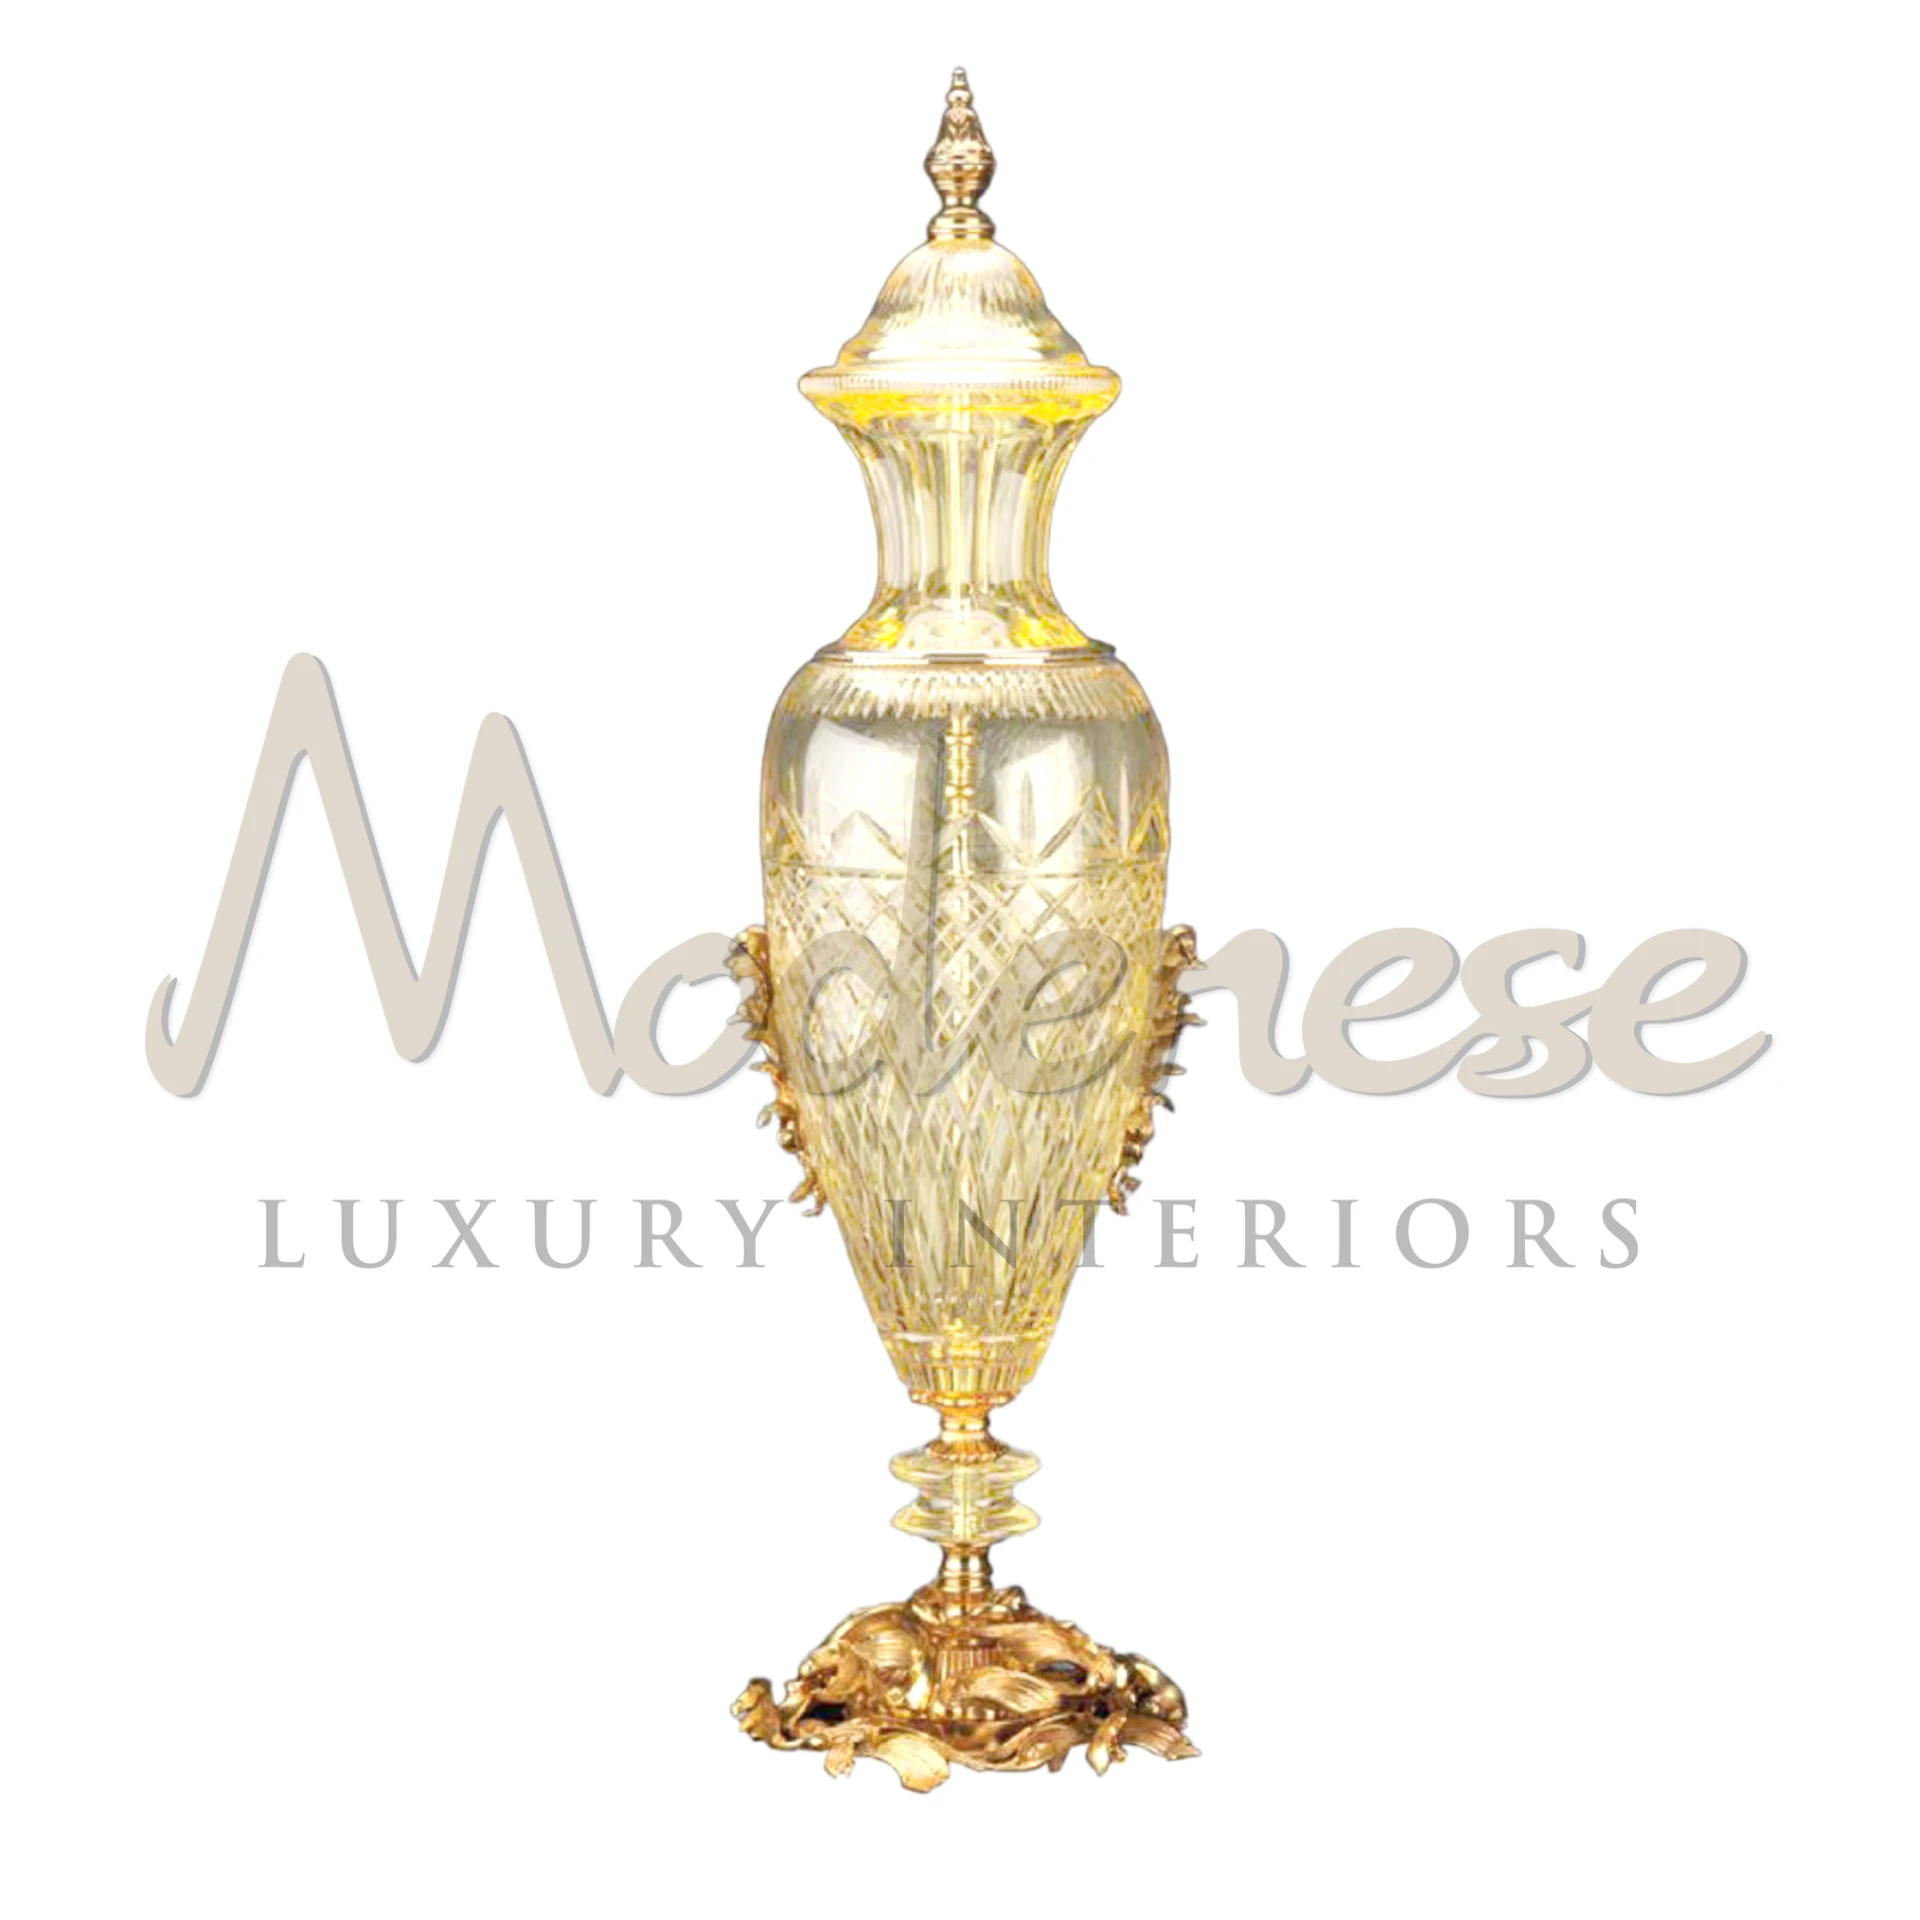 Gorgeous Light Yellow Glass Amphora with a narrow neck and rounded body, adds a touch of elegance and vibrancy to luxury and classic interior designs.